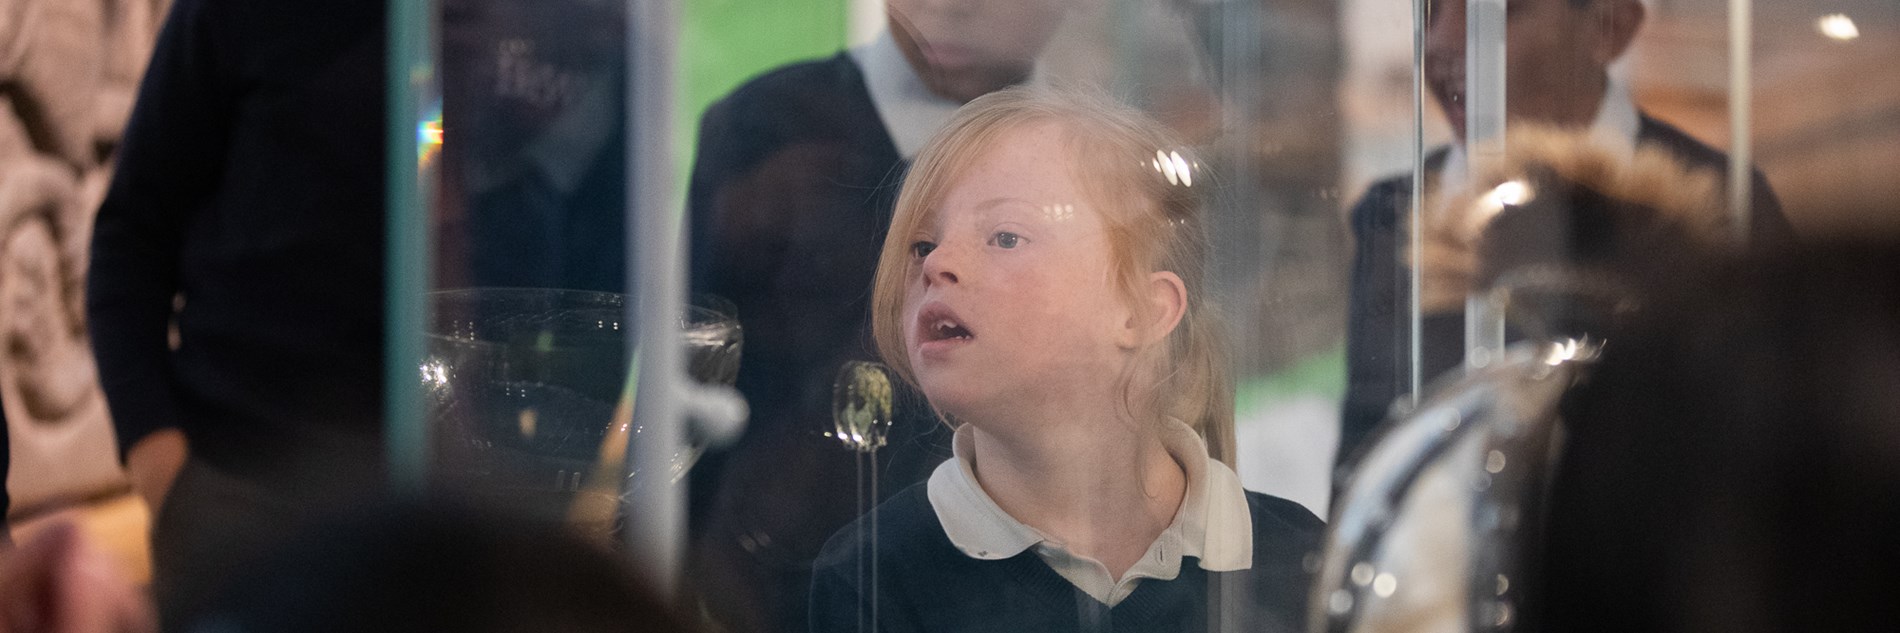 A primary school aged child, seen through a glass exhibition case.